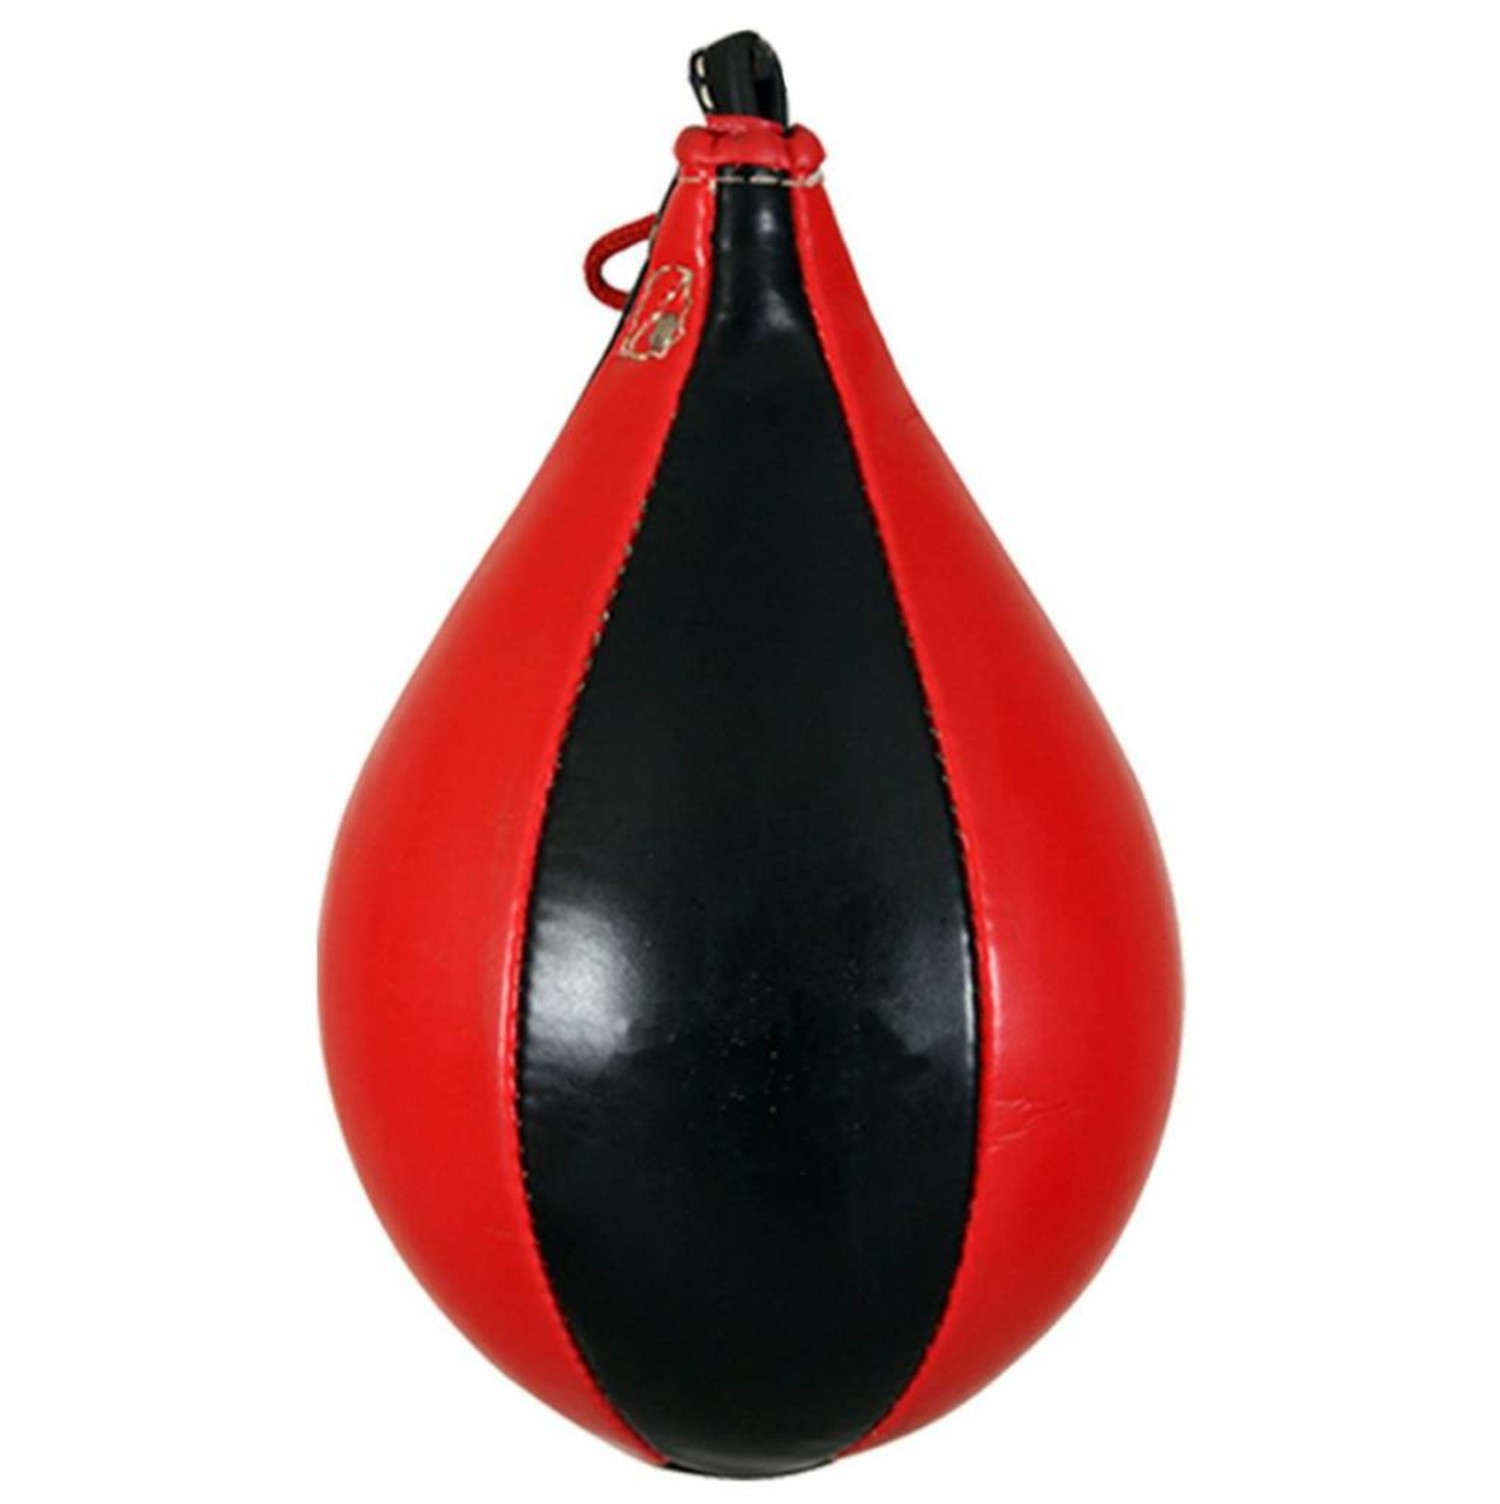 Boxing Speed Ball for sale for improving hand speed and timing - Enso  Martial Arts Shop Bristol